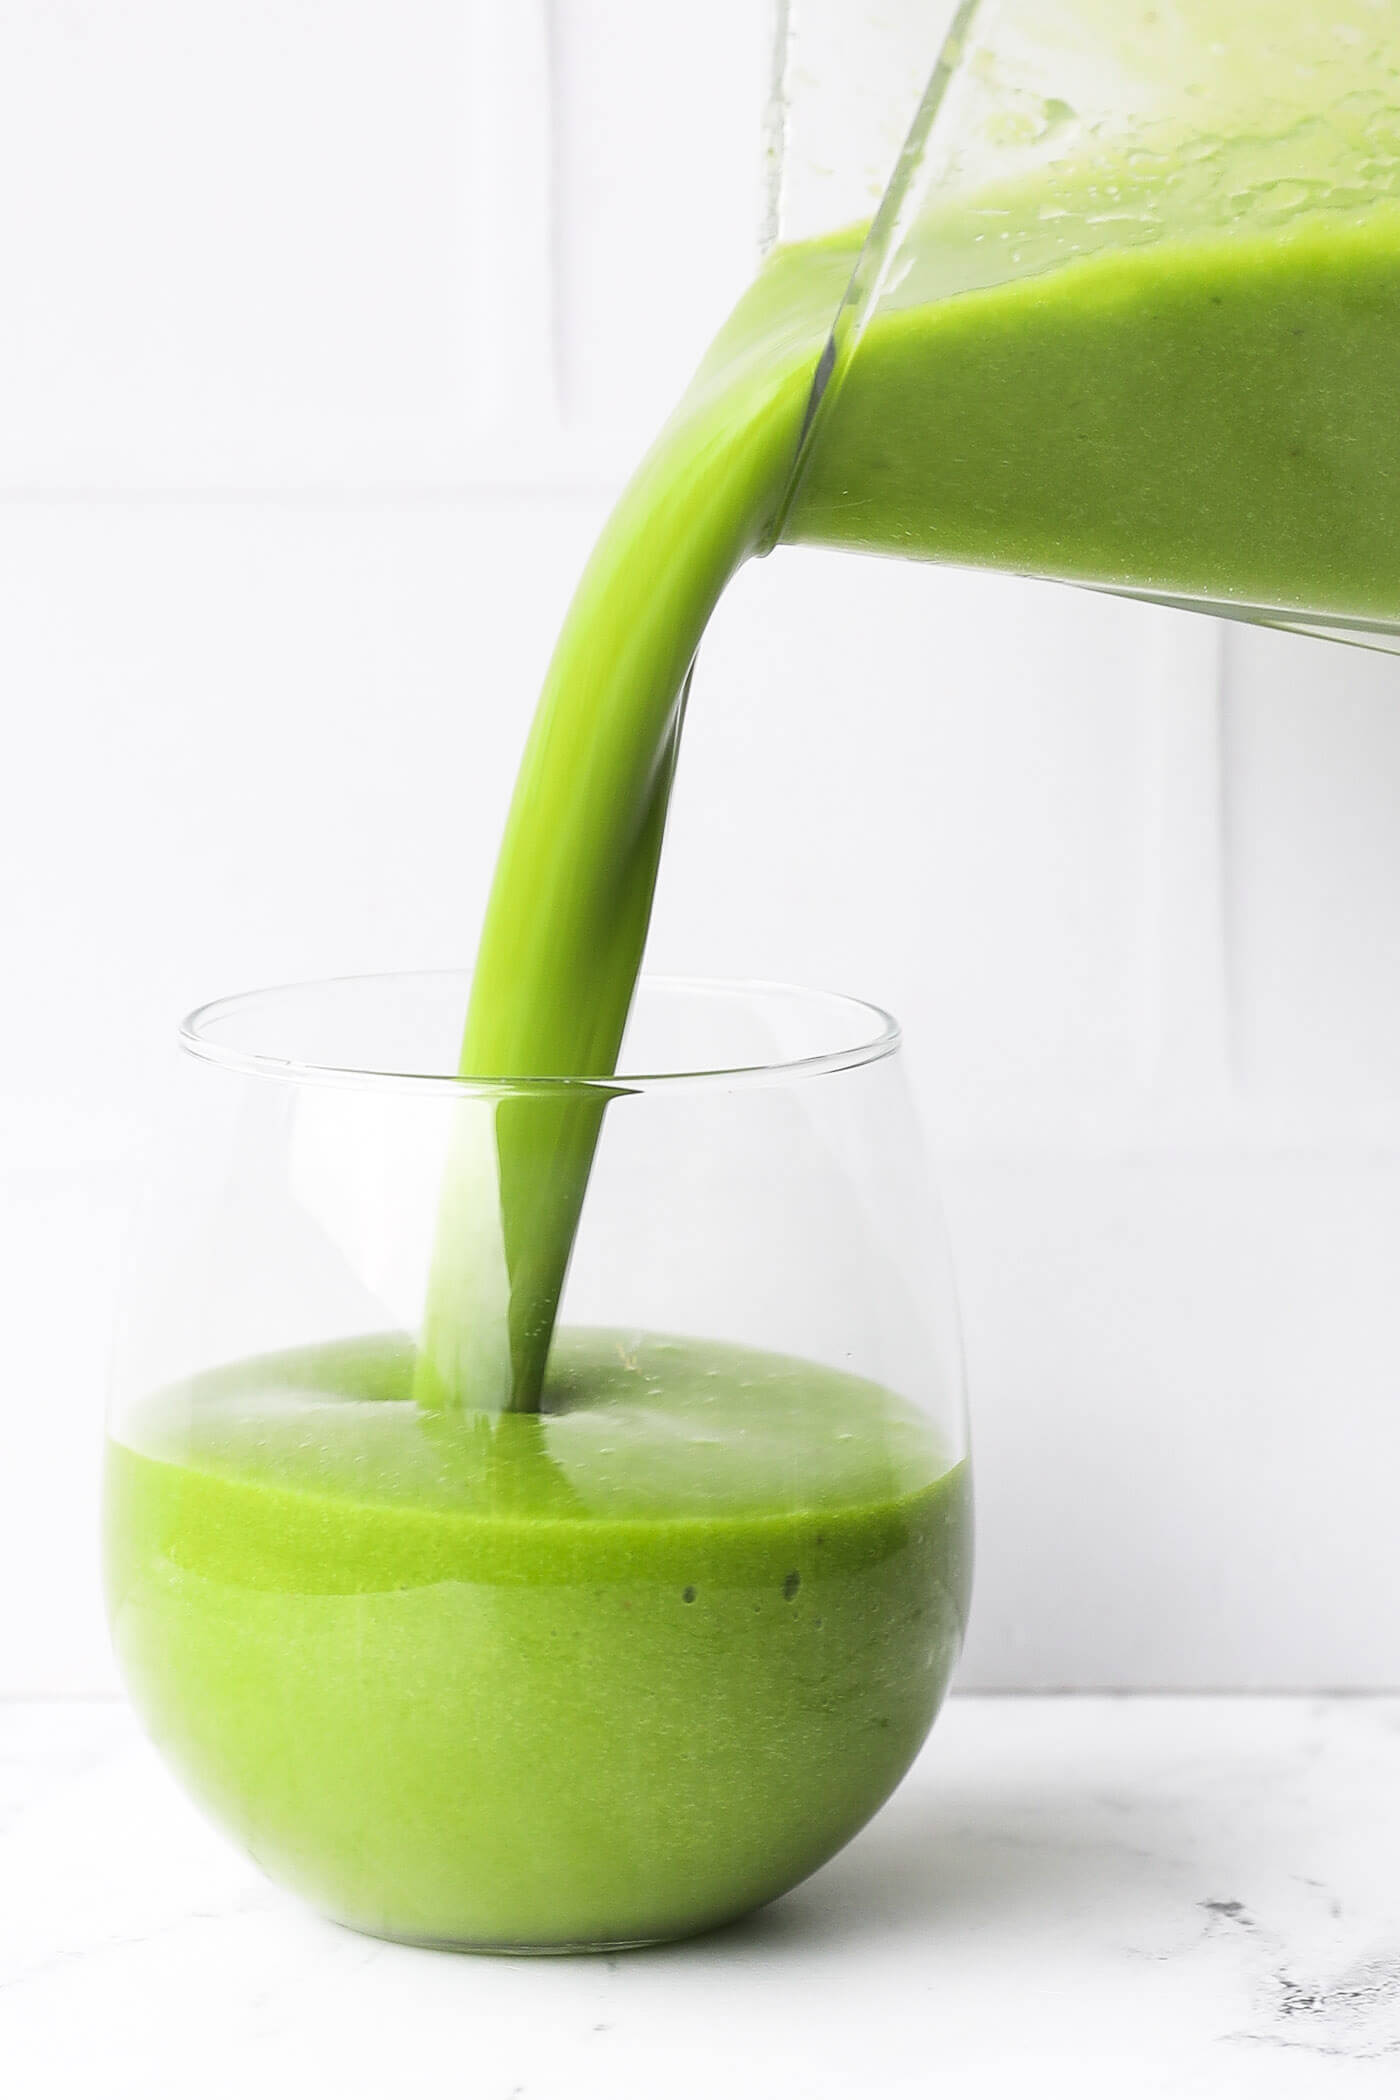 Pouring the vibrant green banana spinach smoothie into a glass.